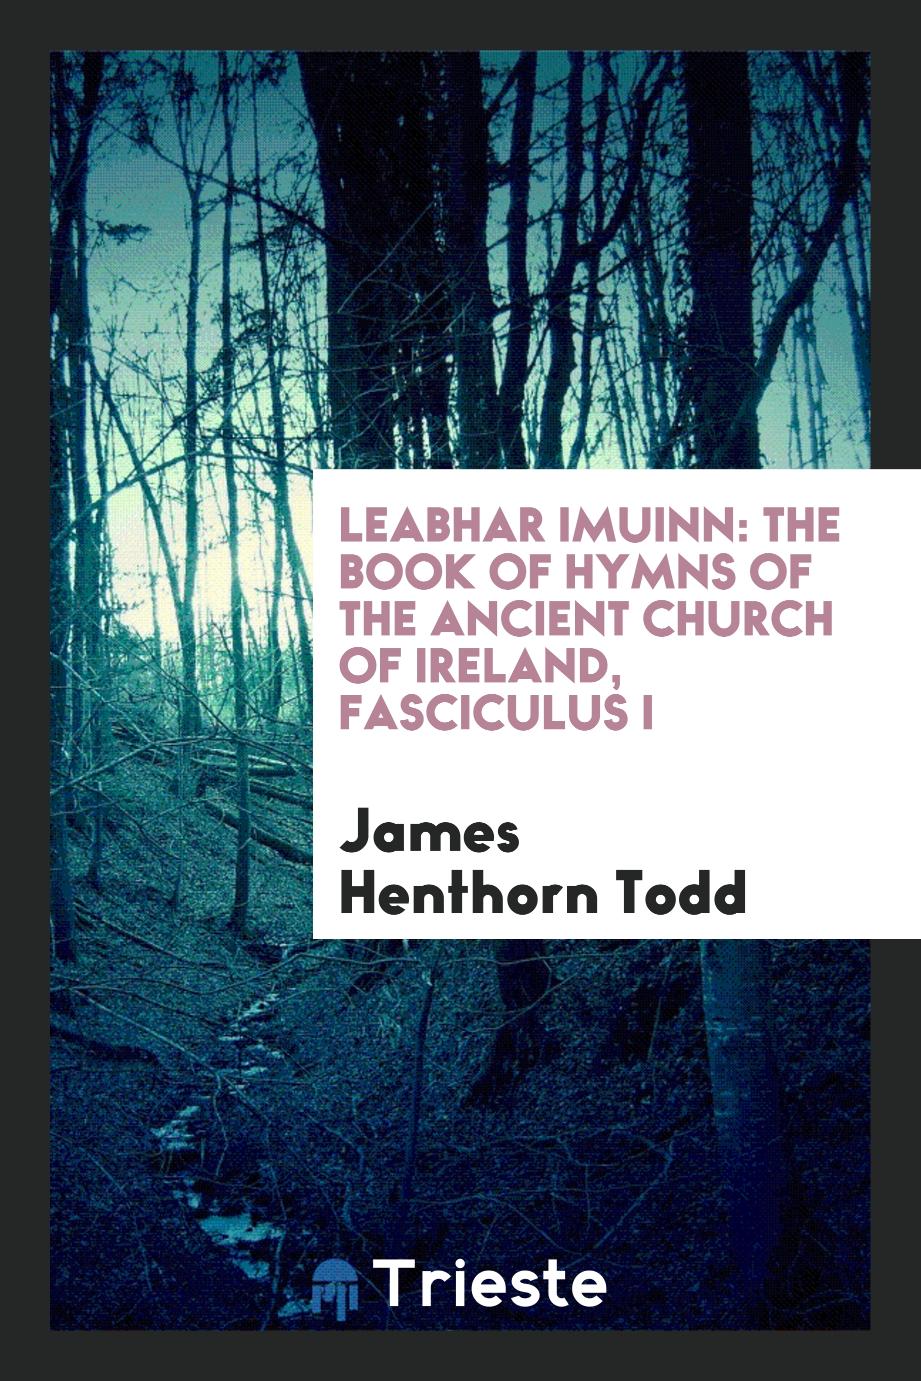 Leabhar Imuinn: The Book of Hymns of the Ancient Church of Ireland, Fasciculus I